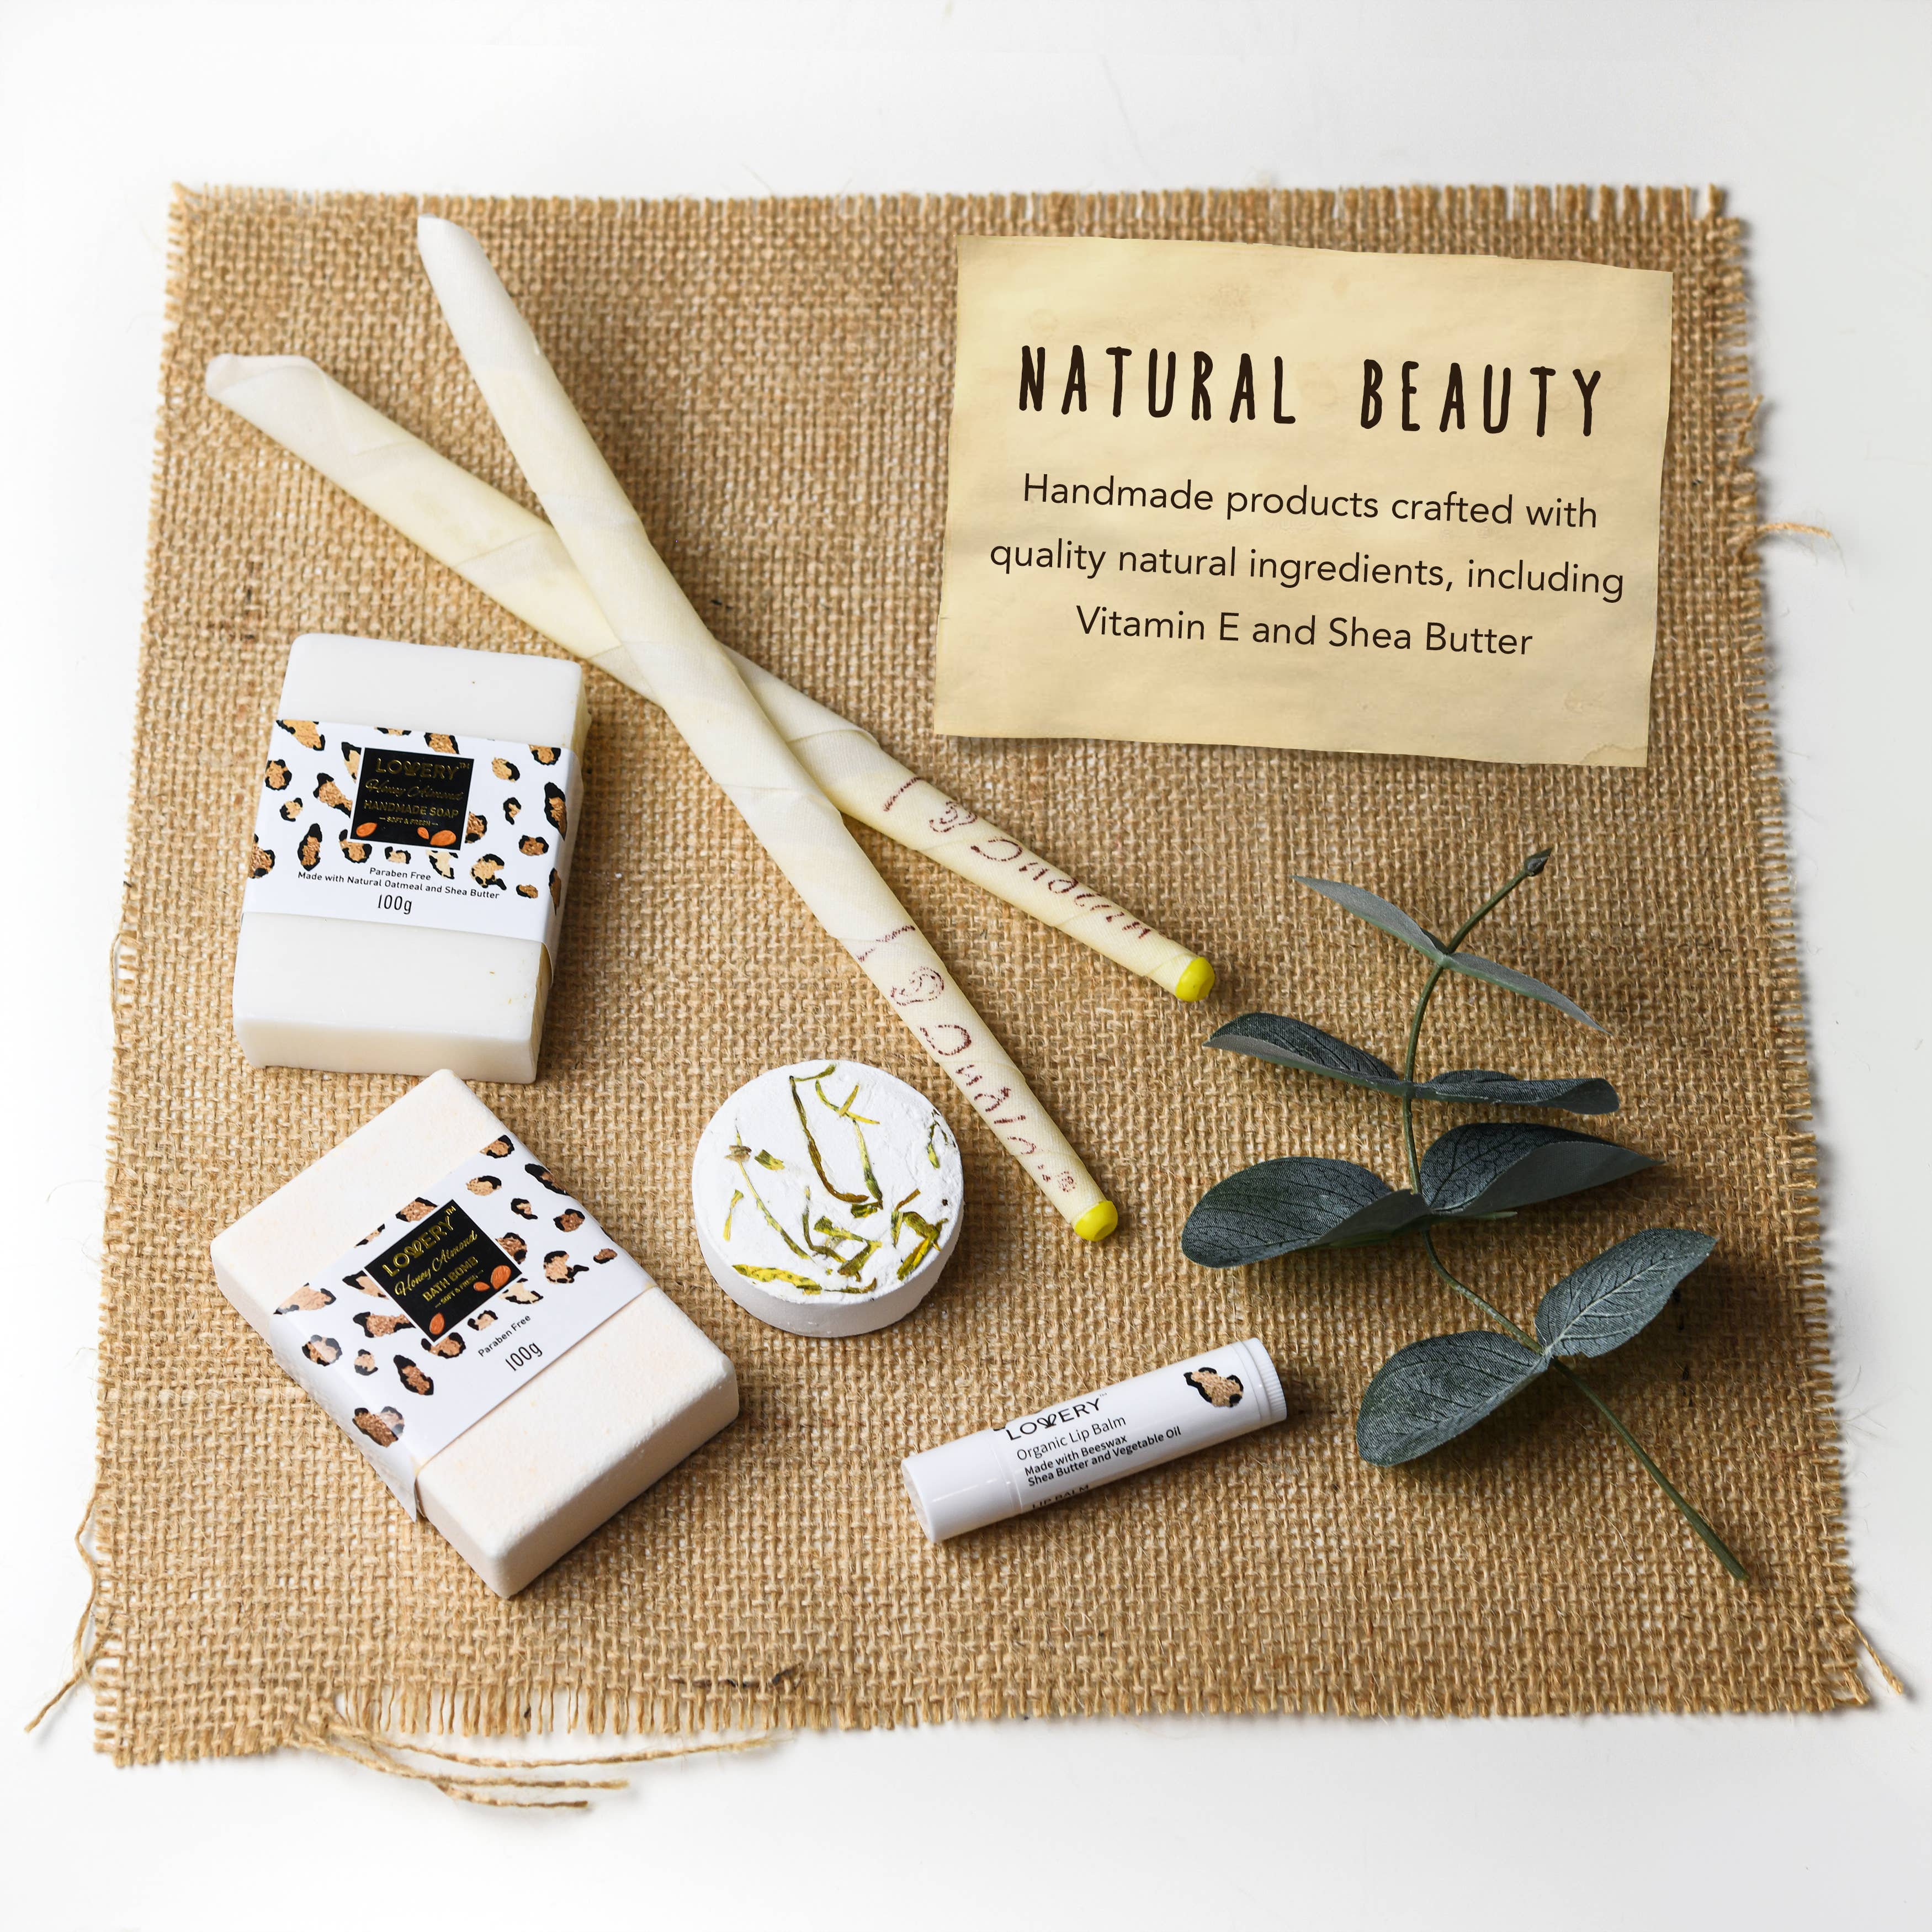 10 All-Natural Organic Beauty Subscription Boxes